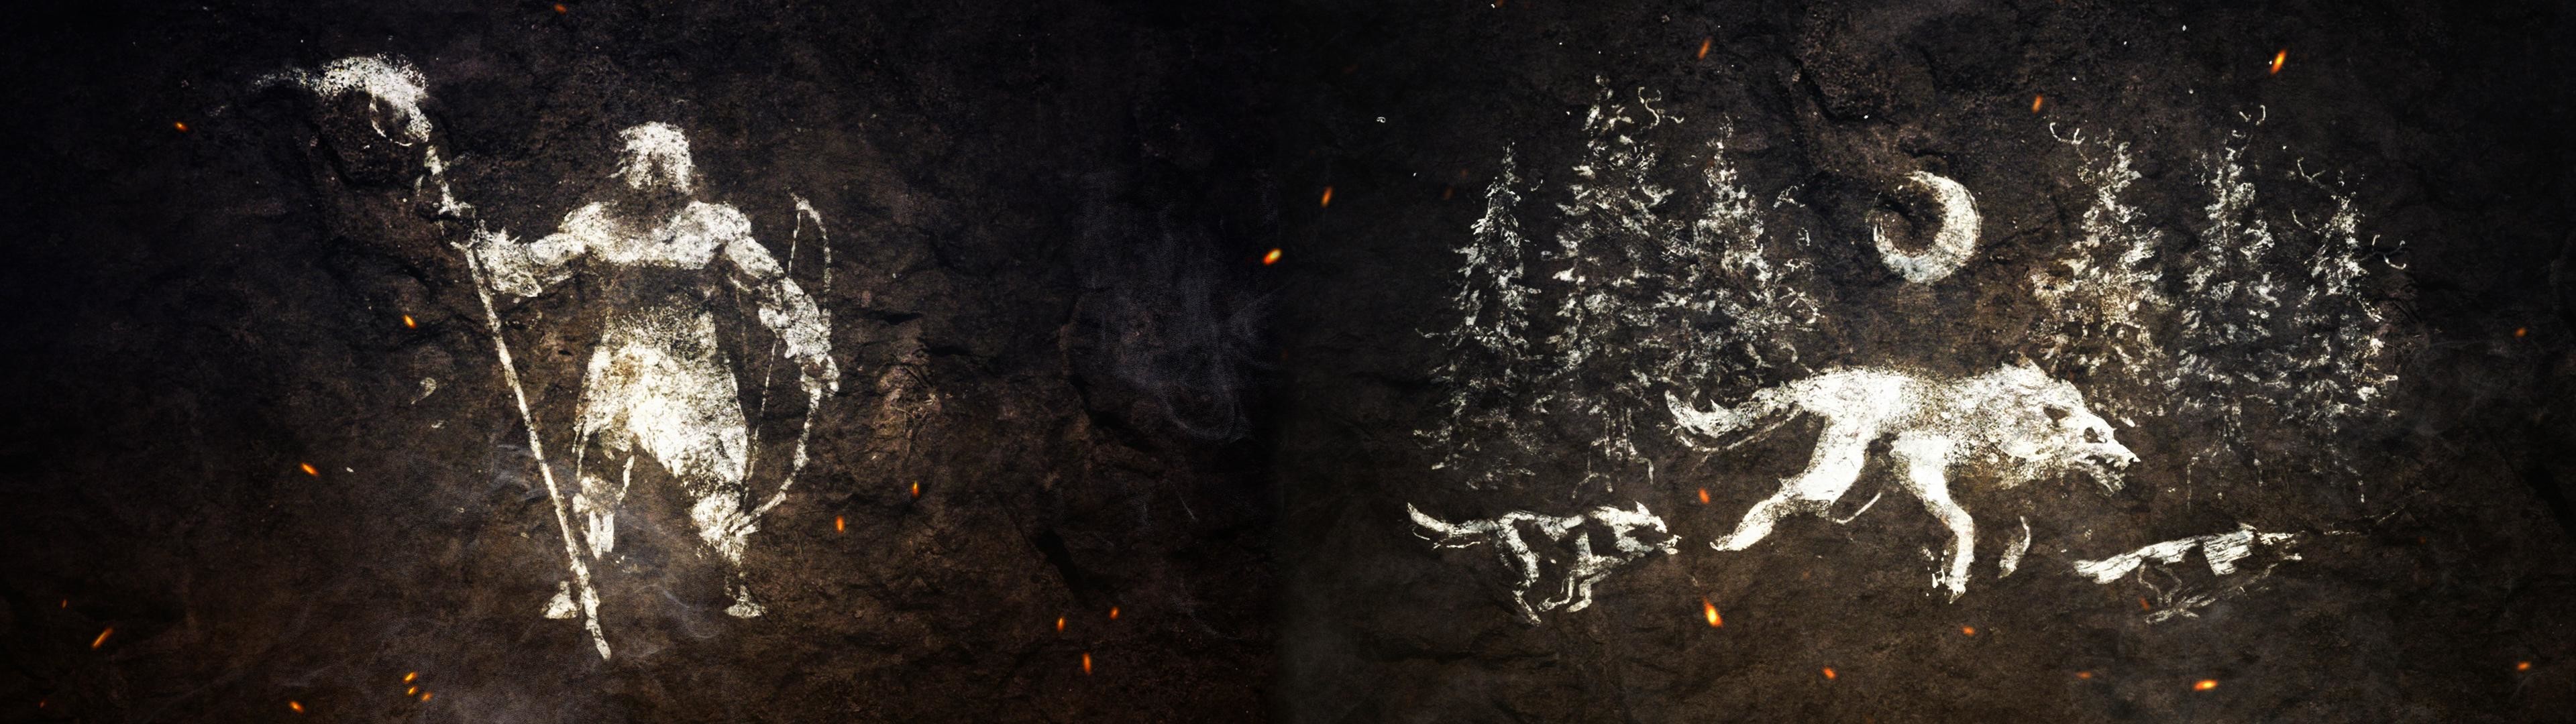 3840x1080 Made a FarCry: Primal Dual Monitor Wallpaper